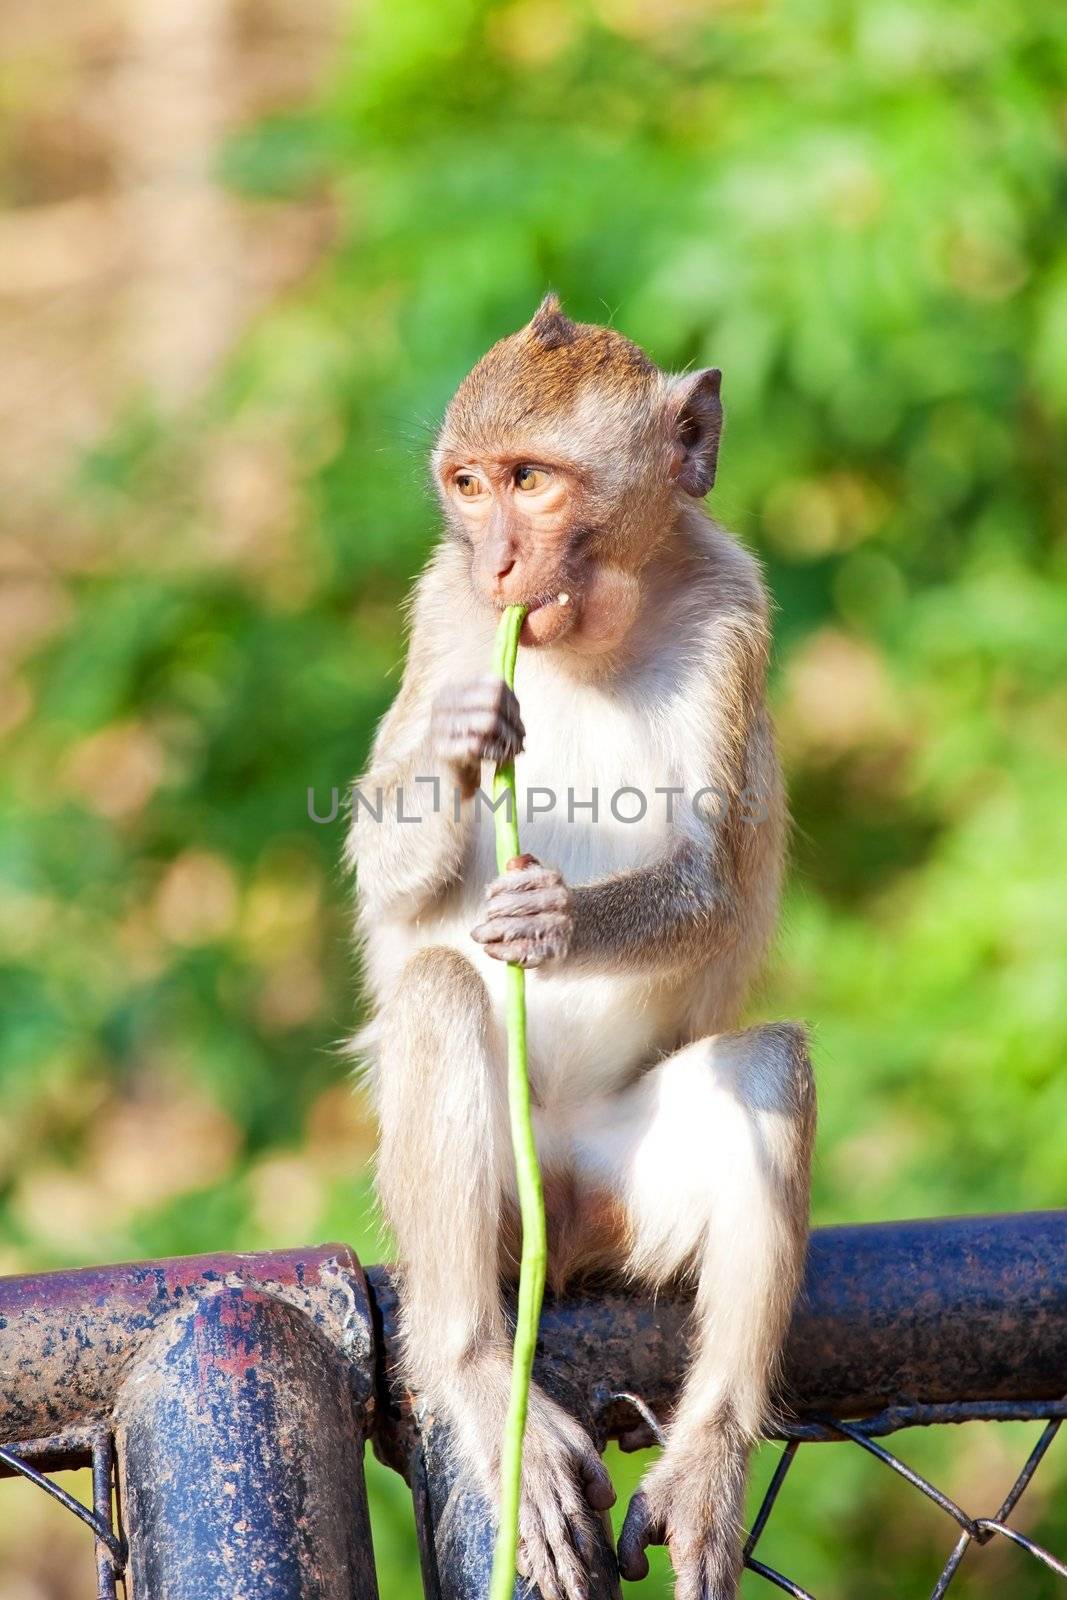 little Monkey eating and sitting